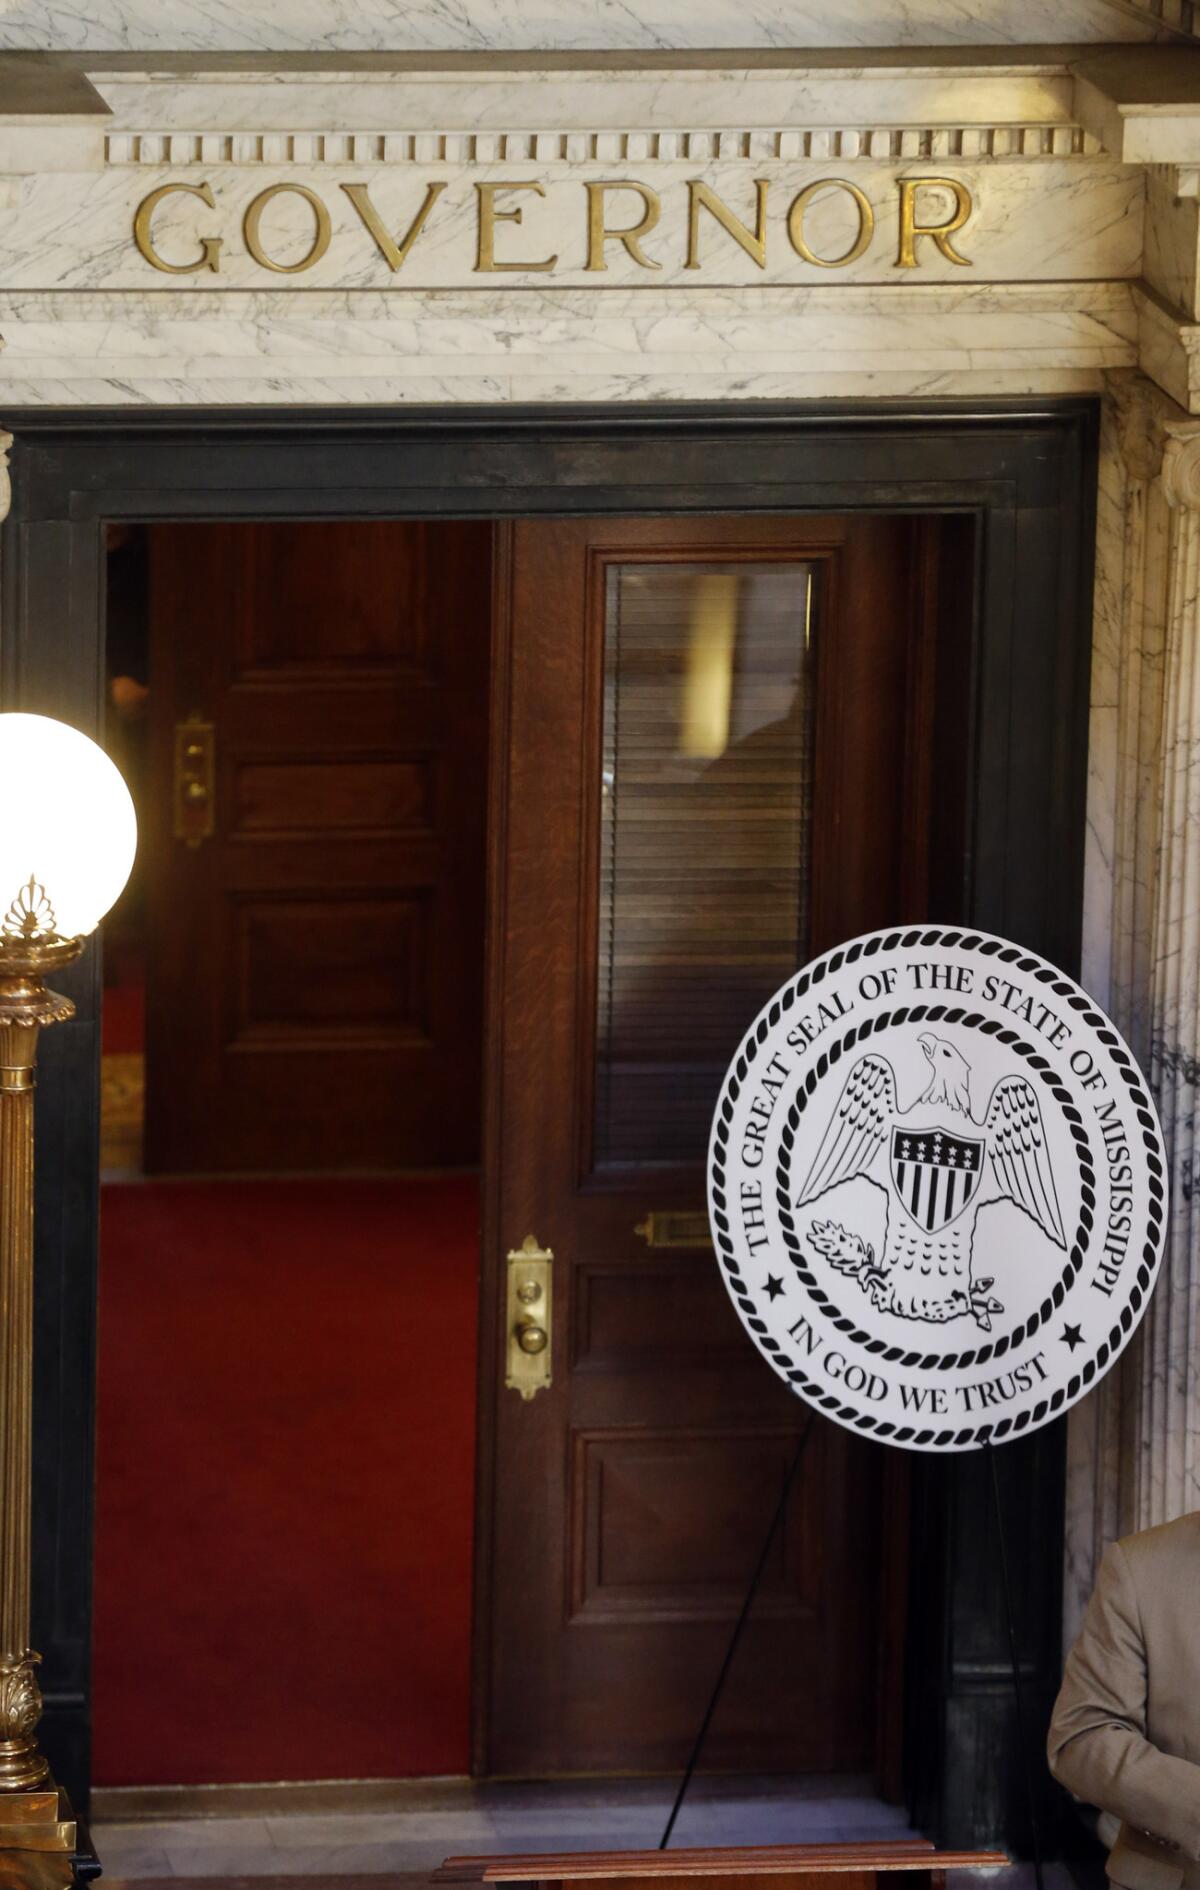 A mockup of the suggested new Mississippi state seal, with the words "In God we trust" added, sits outside Gov. Phil Bryant's office at the state Capitol in Jackson. The change is one of several parts of a controversial "religious freedom restoration" measure awaiting action by the governor.